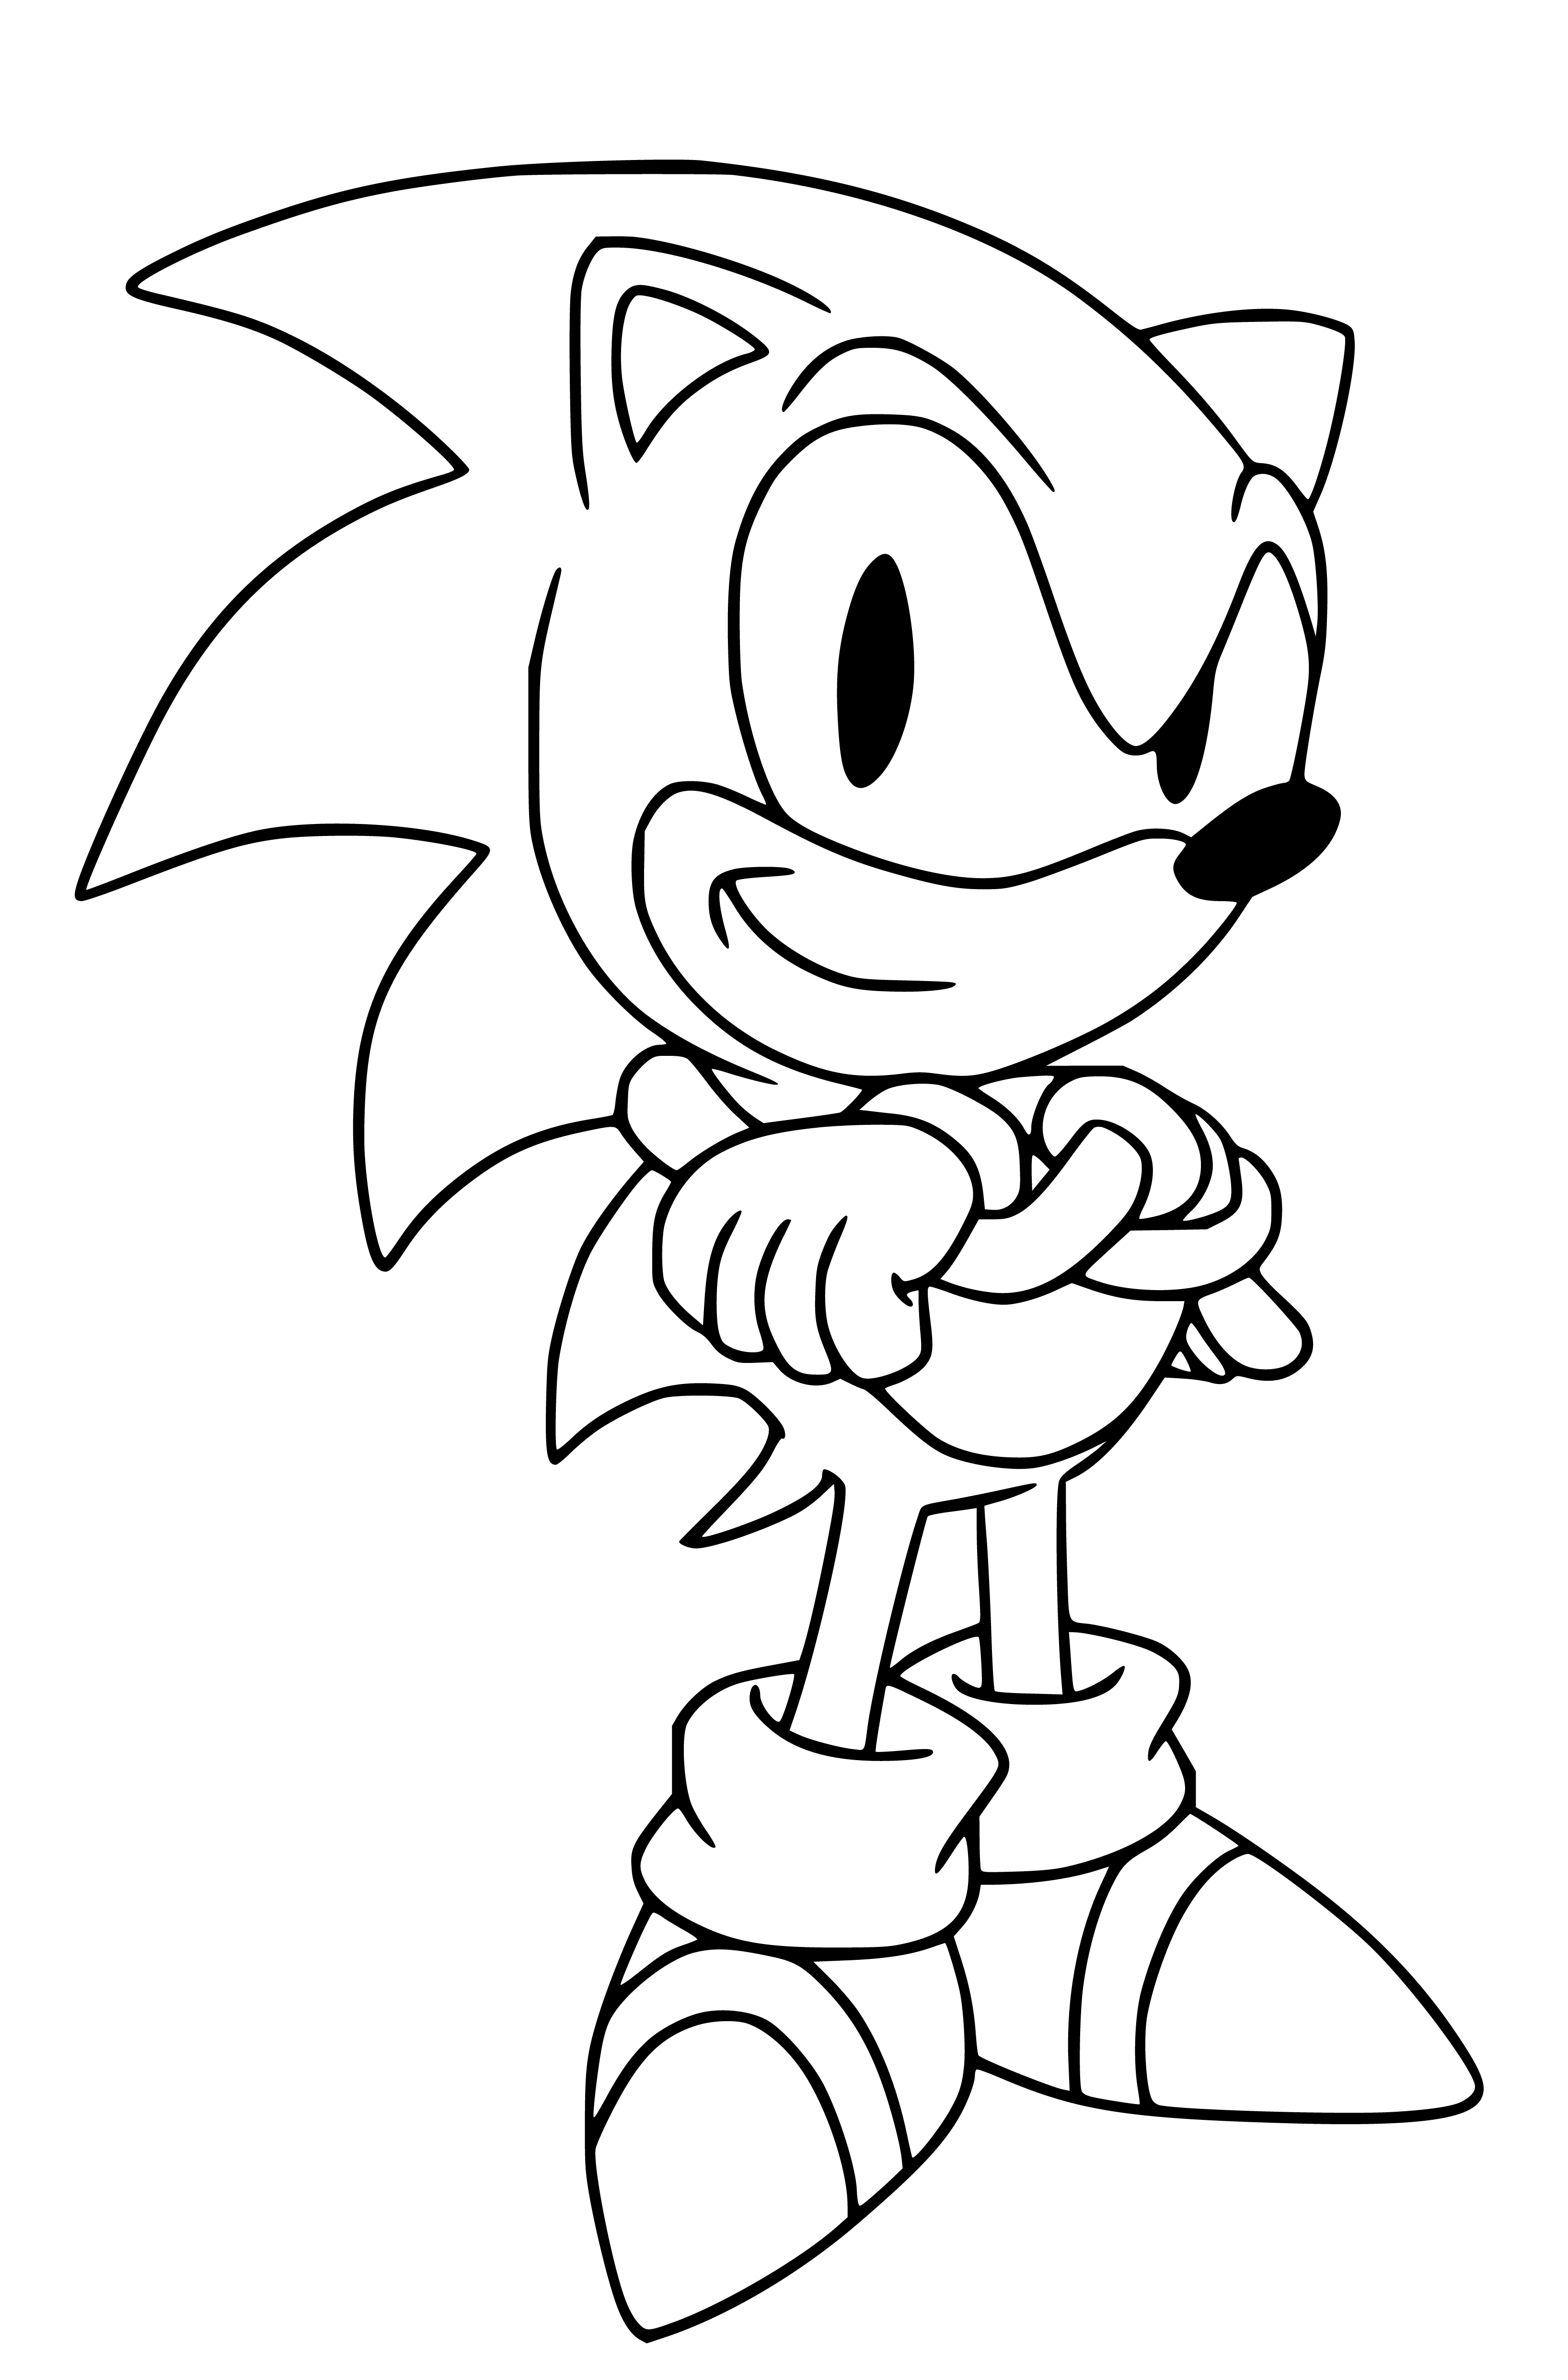 Printable drawing of Sonic Coloring Page for kids.